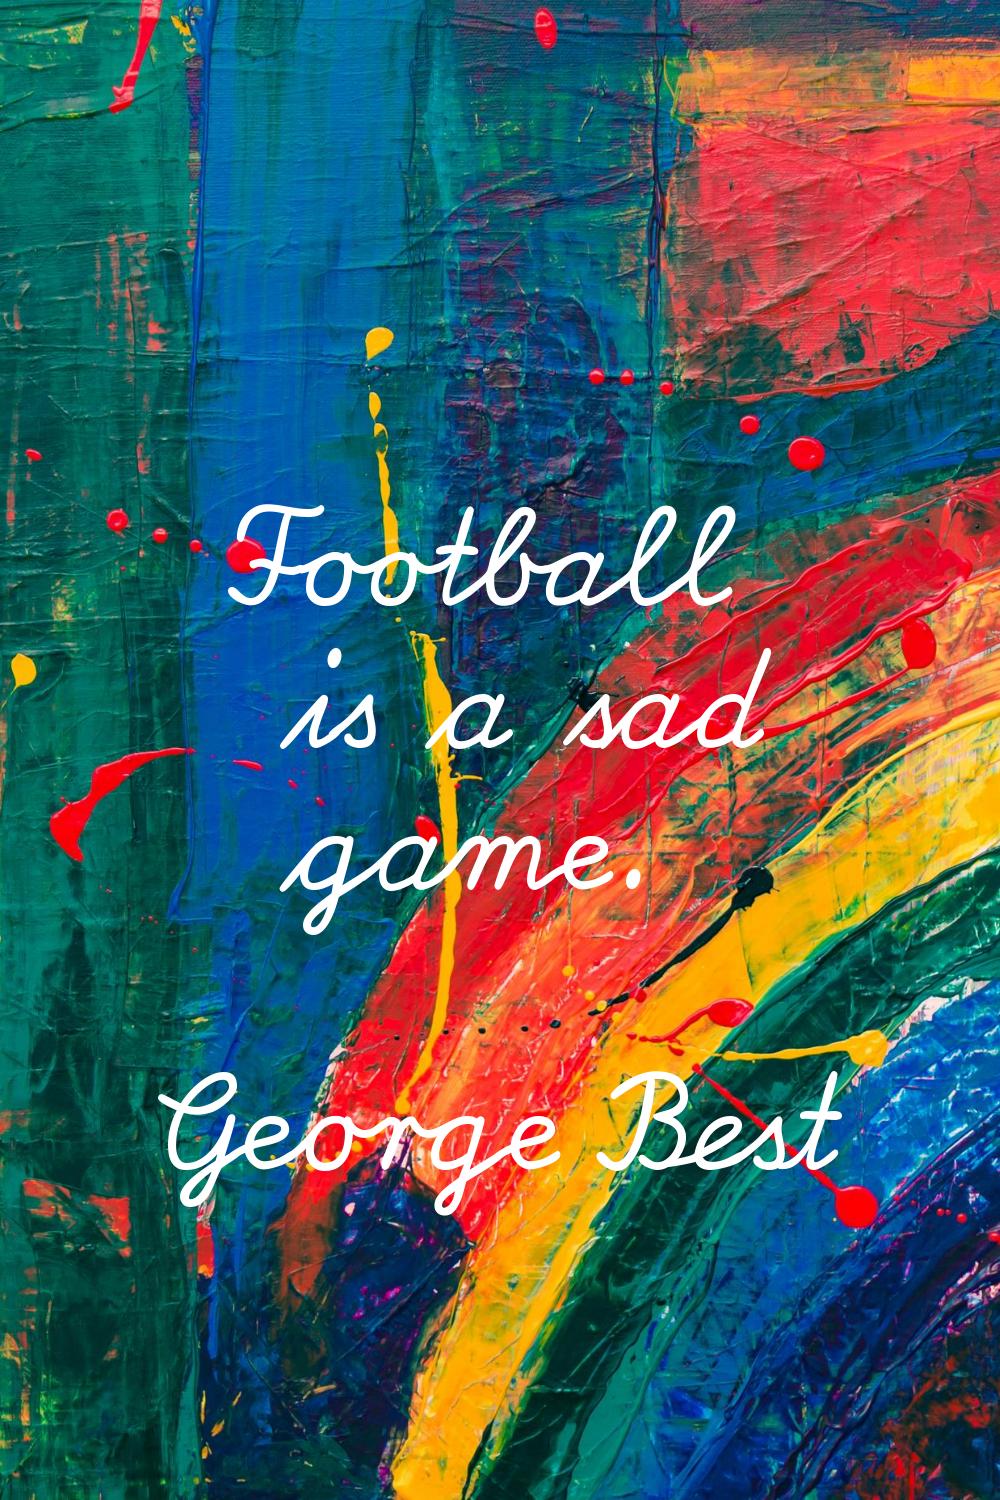 Football is a sad game.